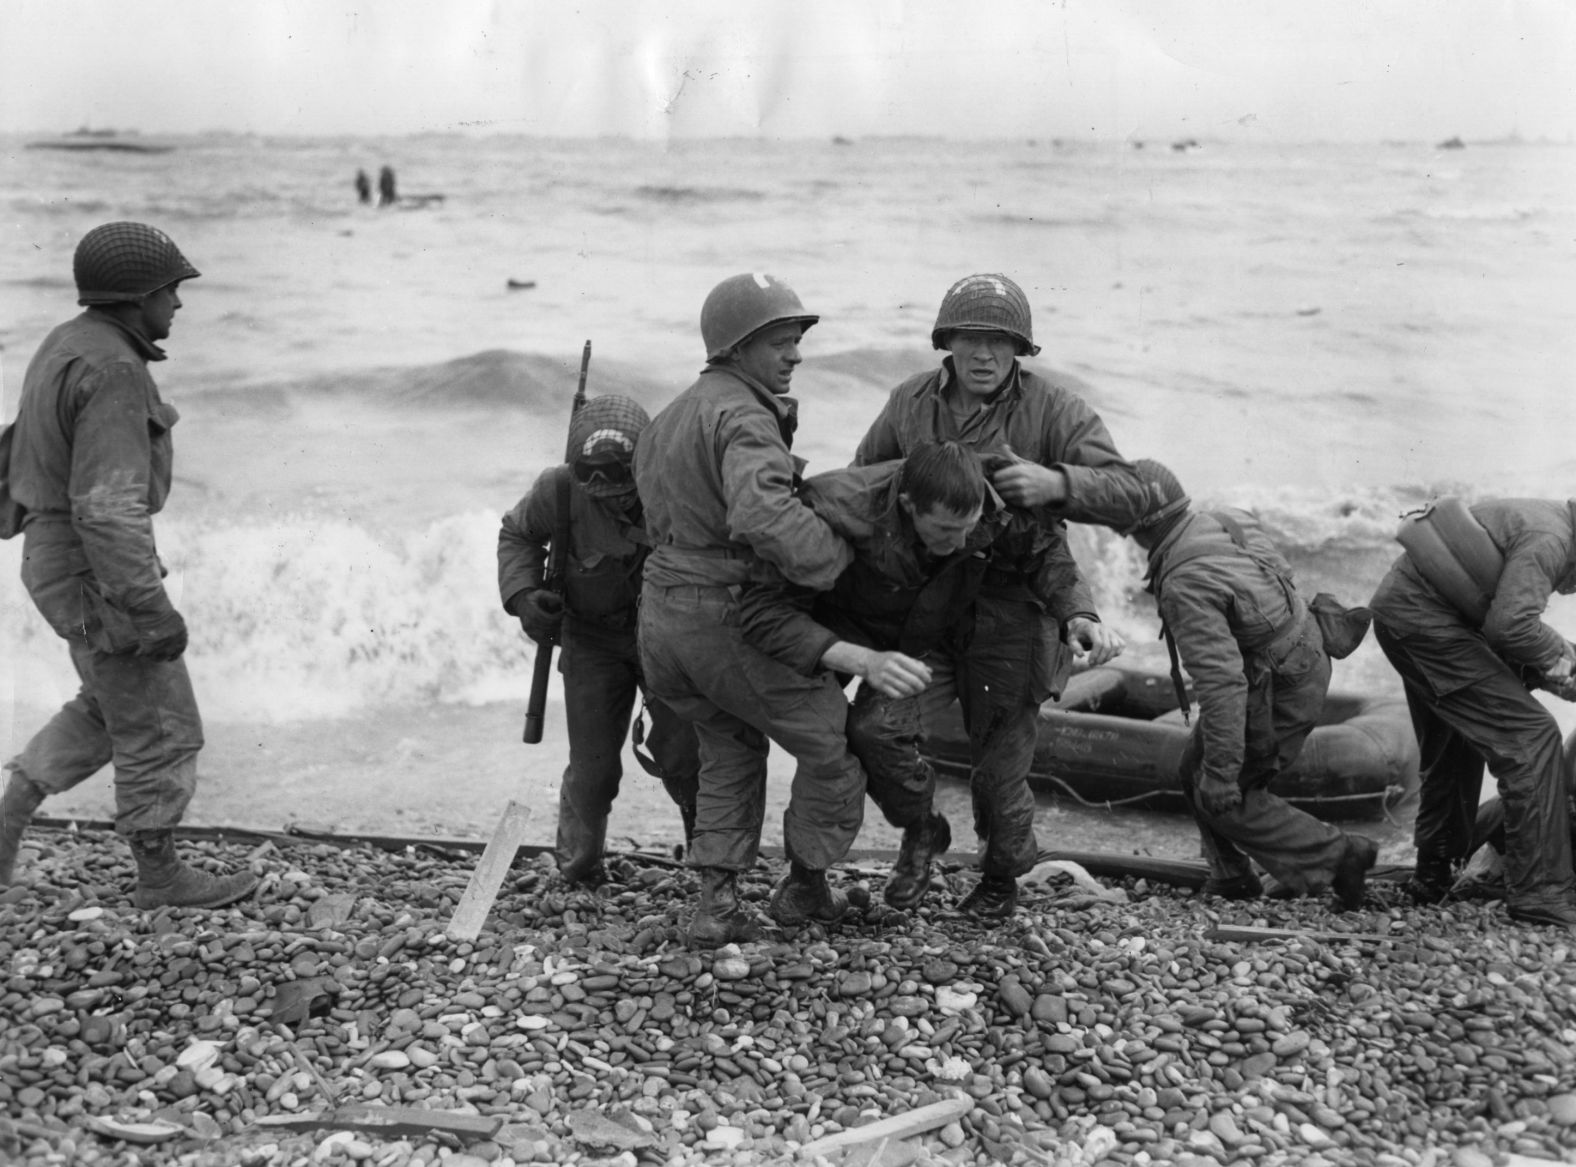 American troops help their injured comrades after their landing craft was fired upon.